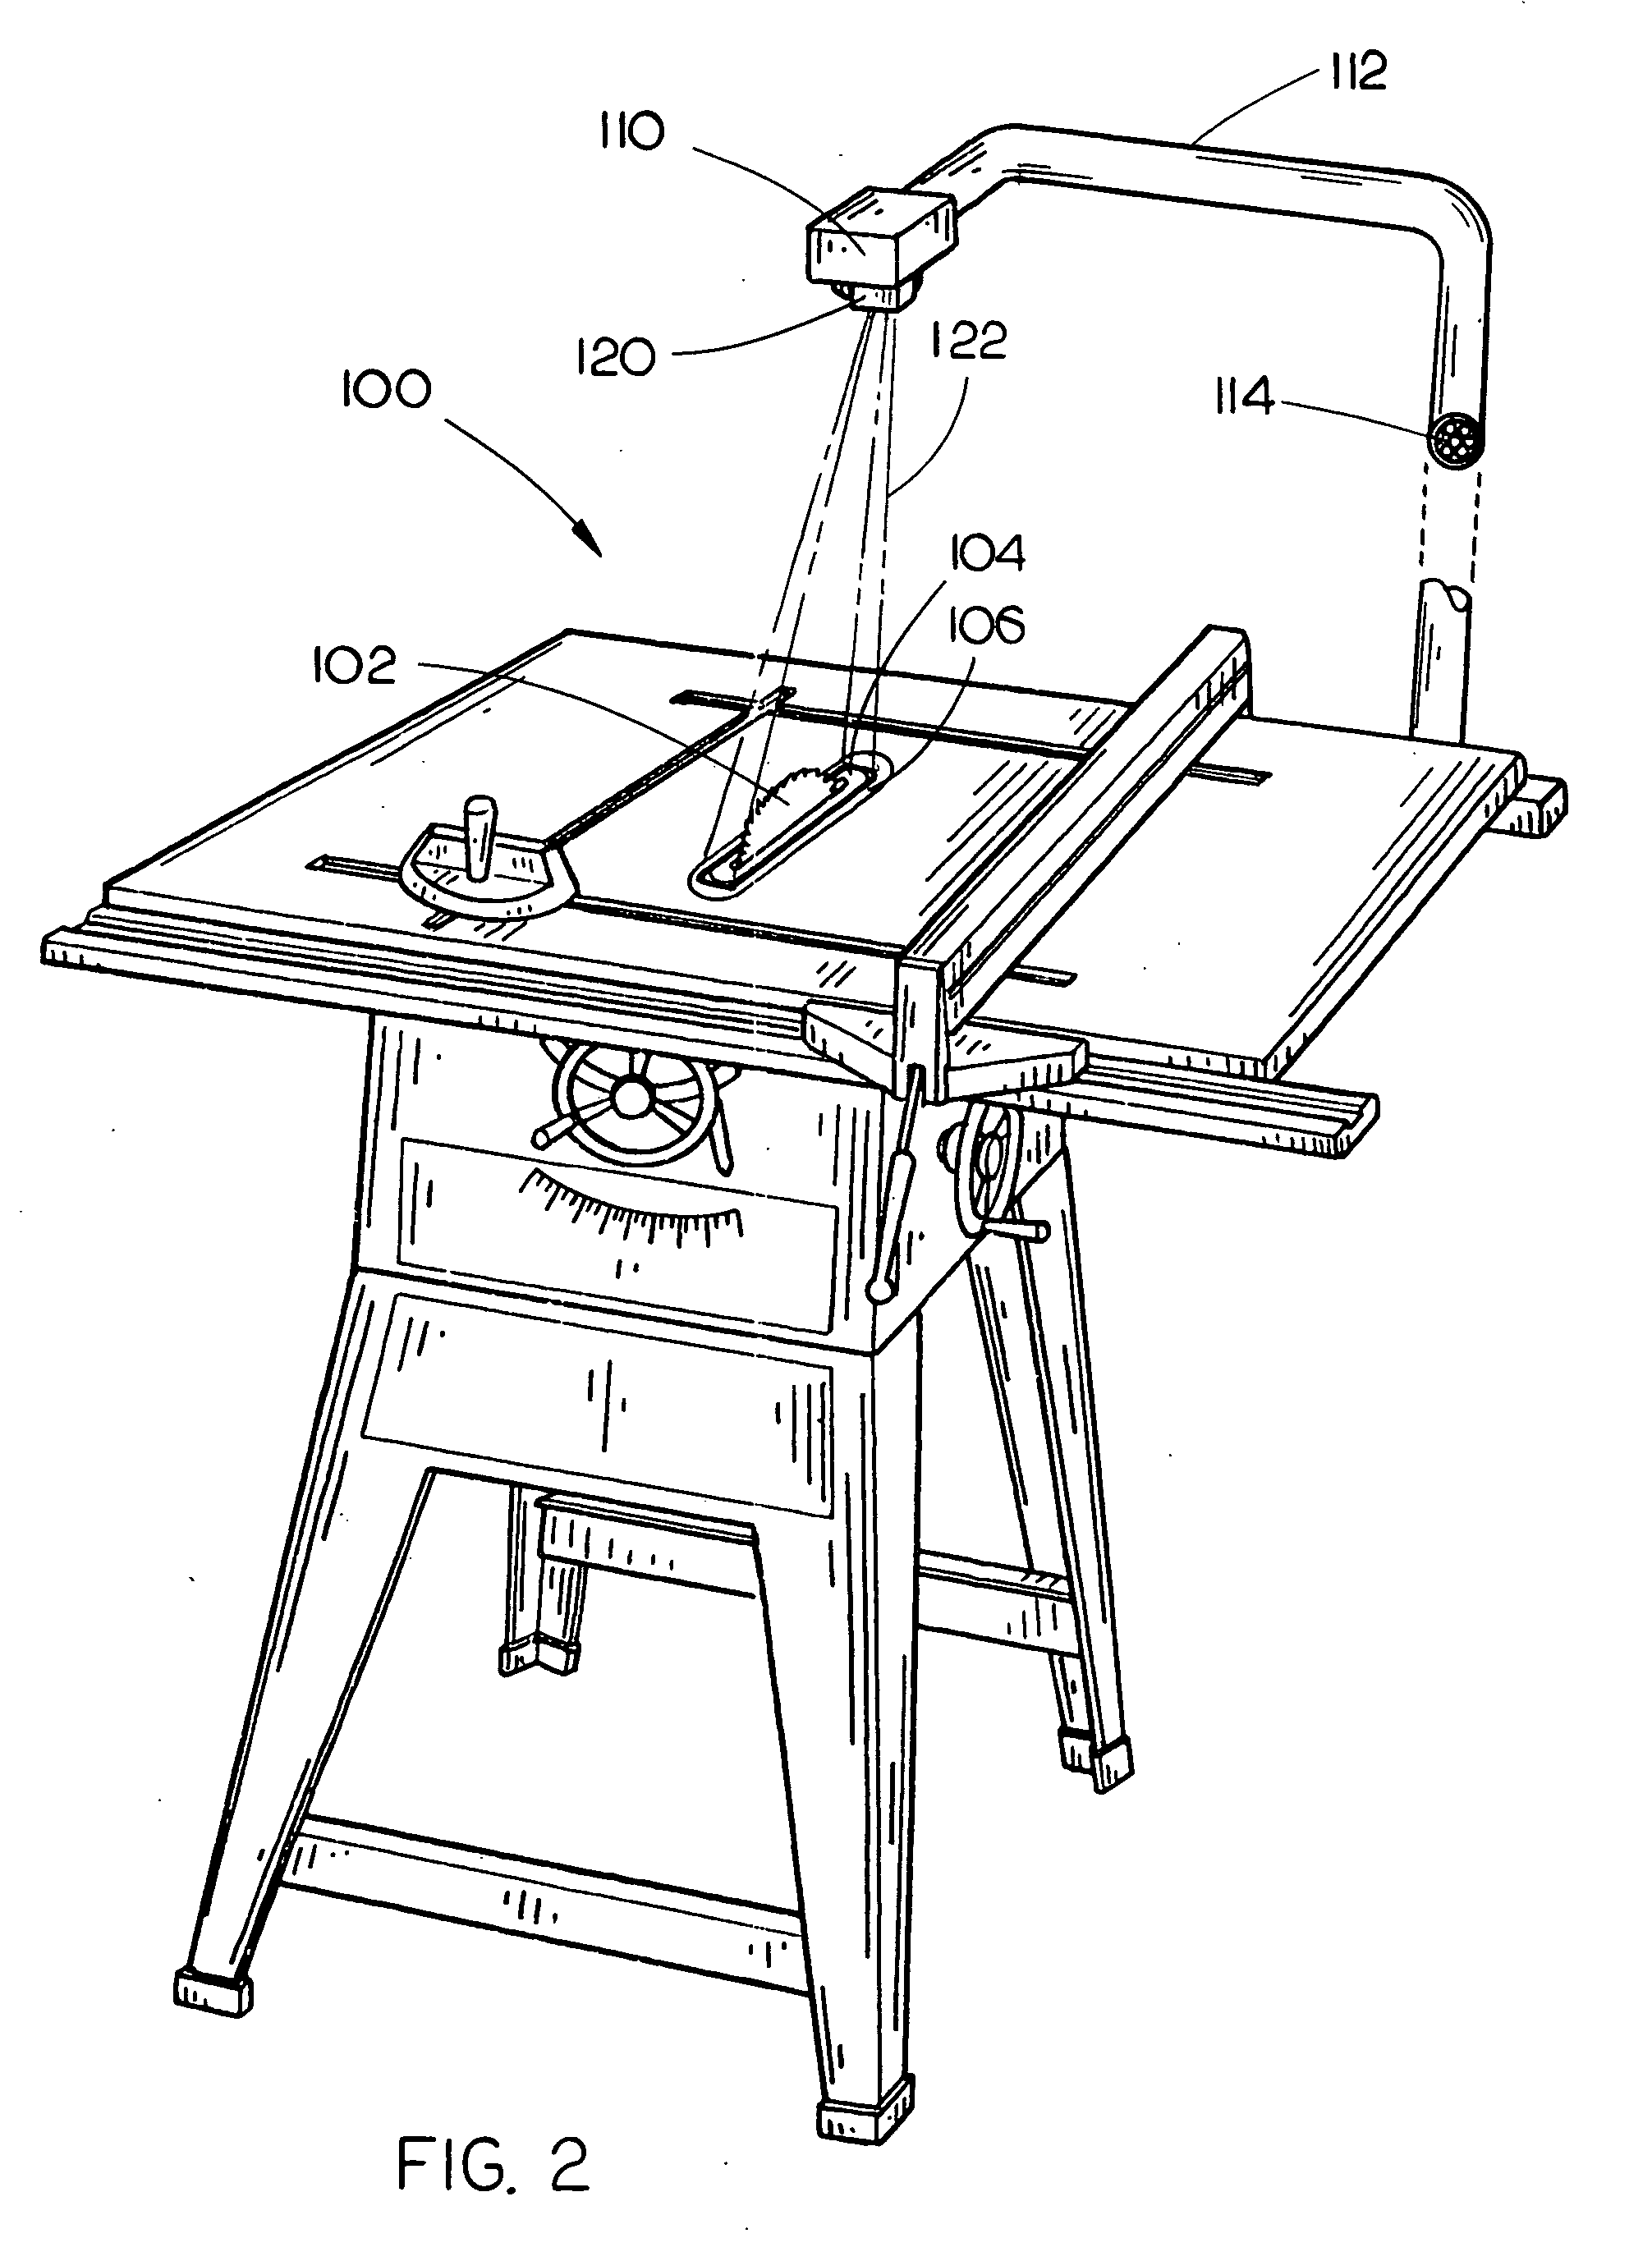 System and method for rapidly stopping a spinning table saw blade